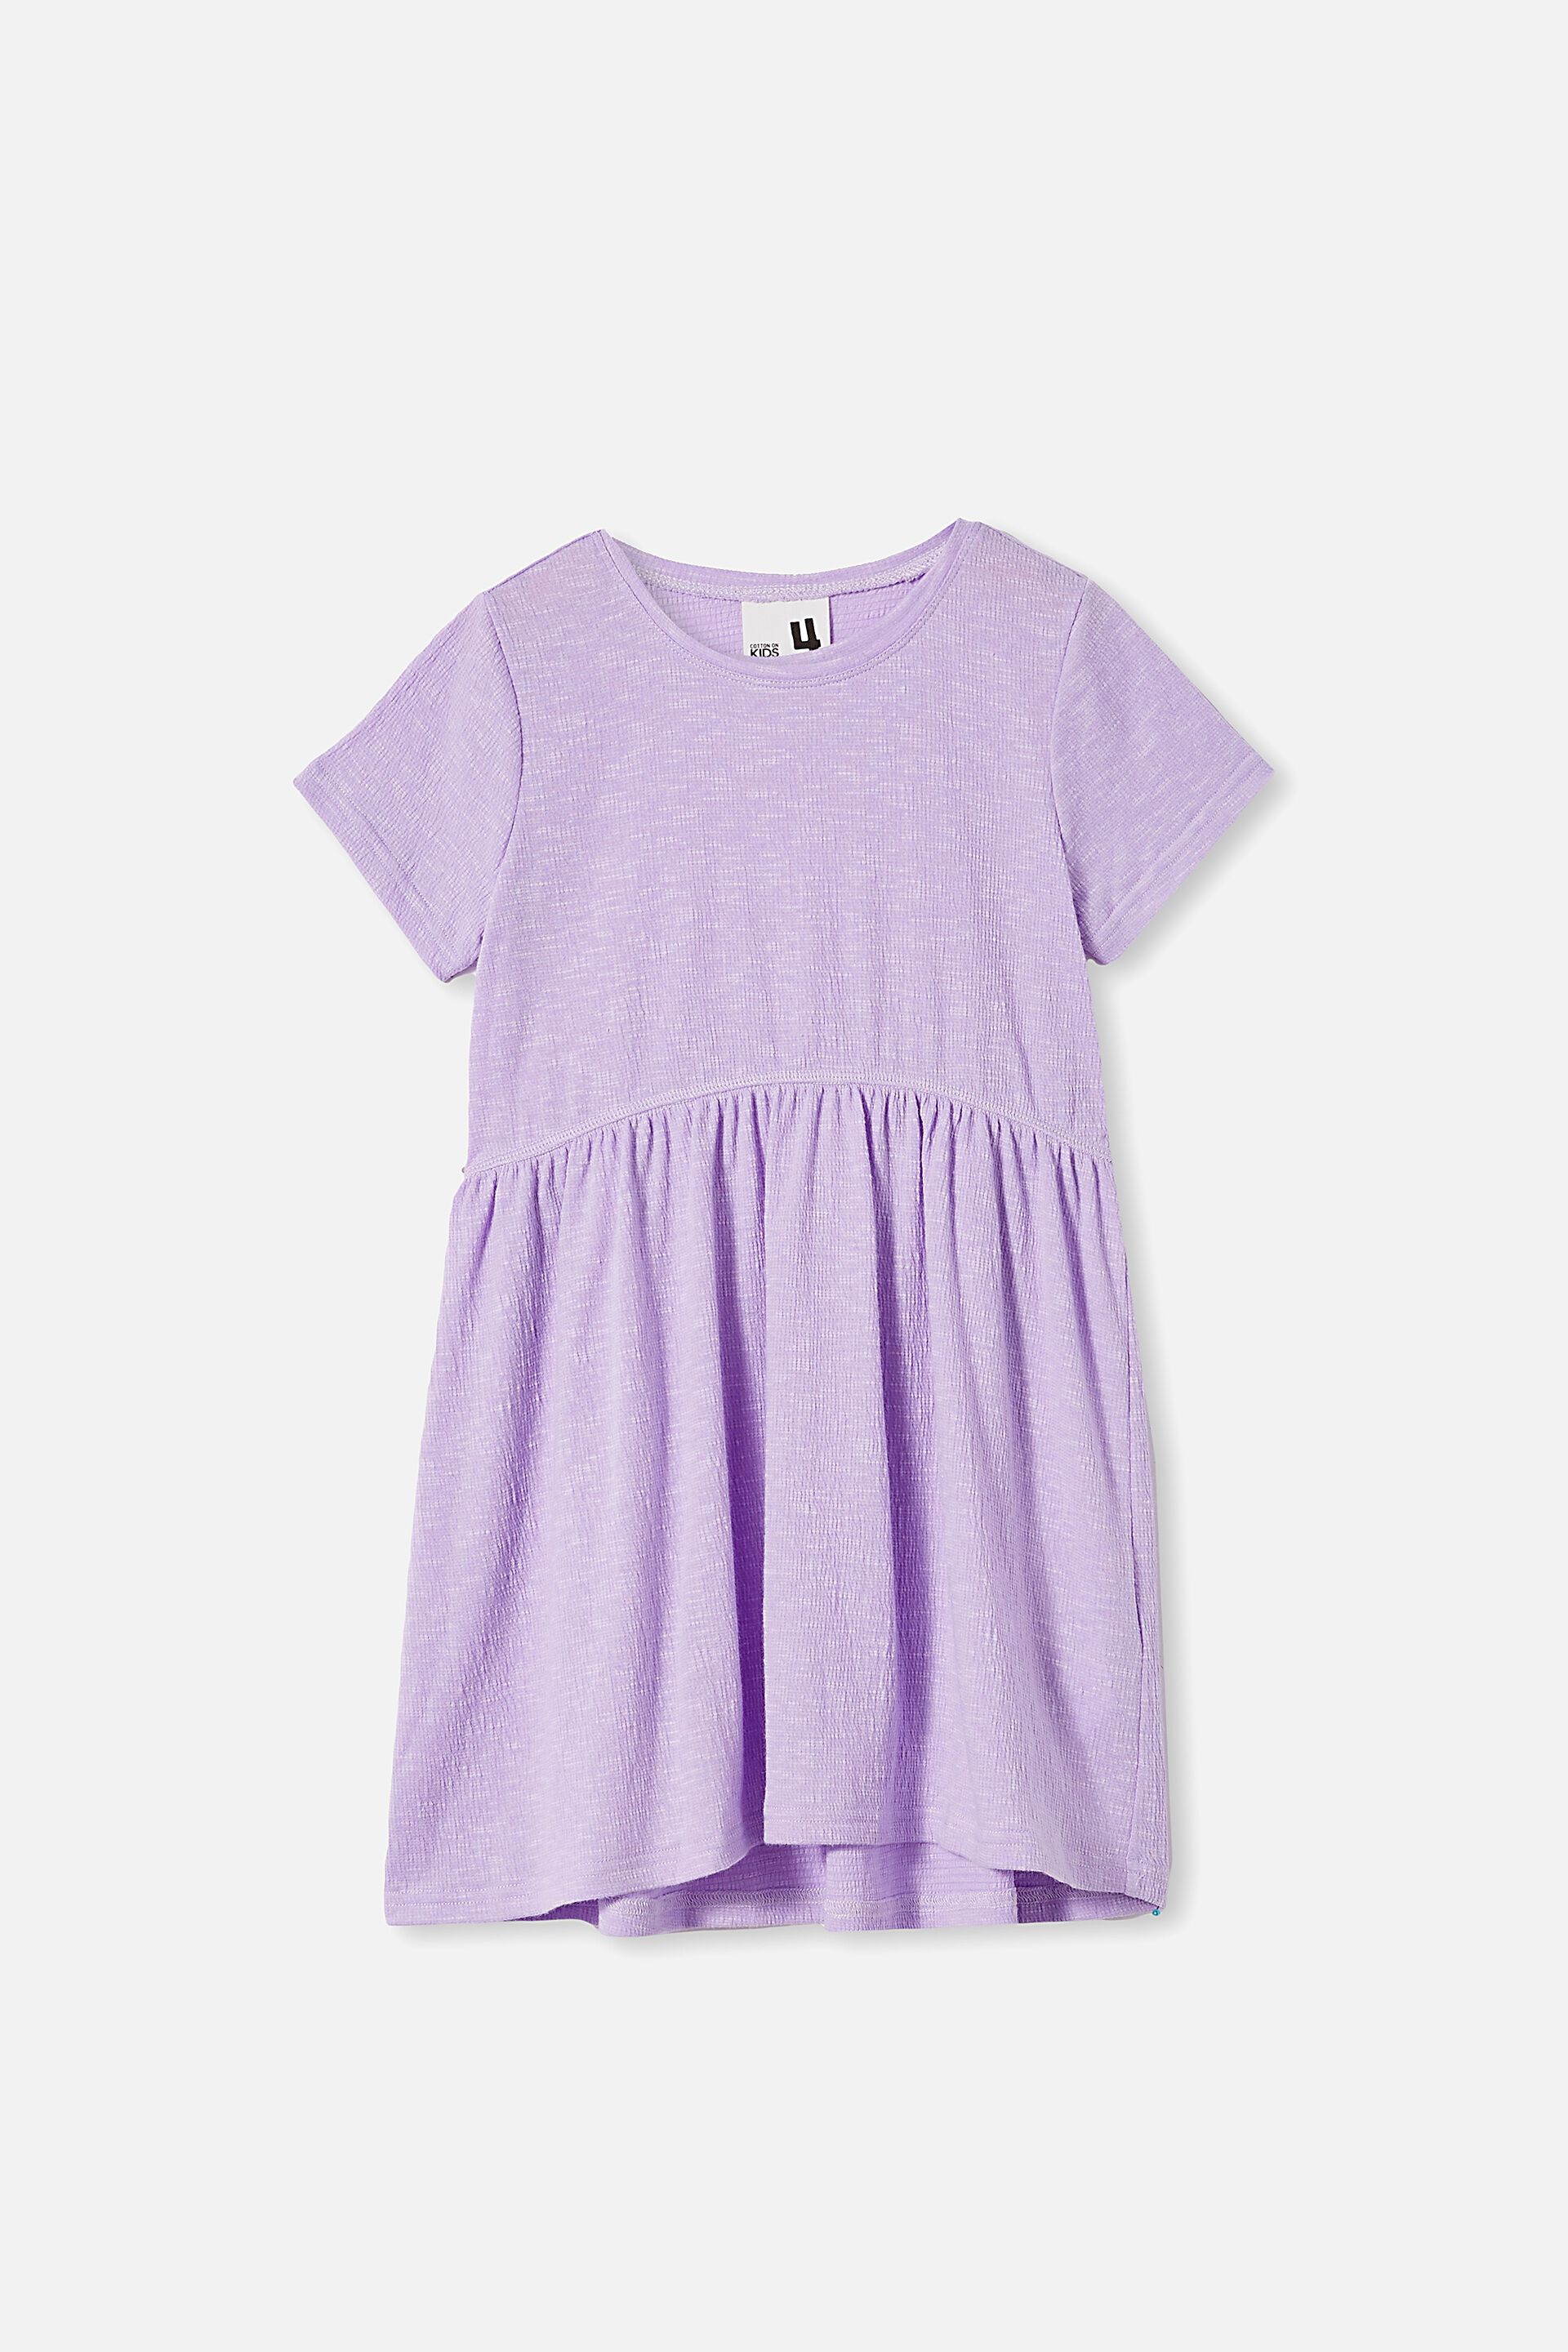 lavender overall dress